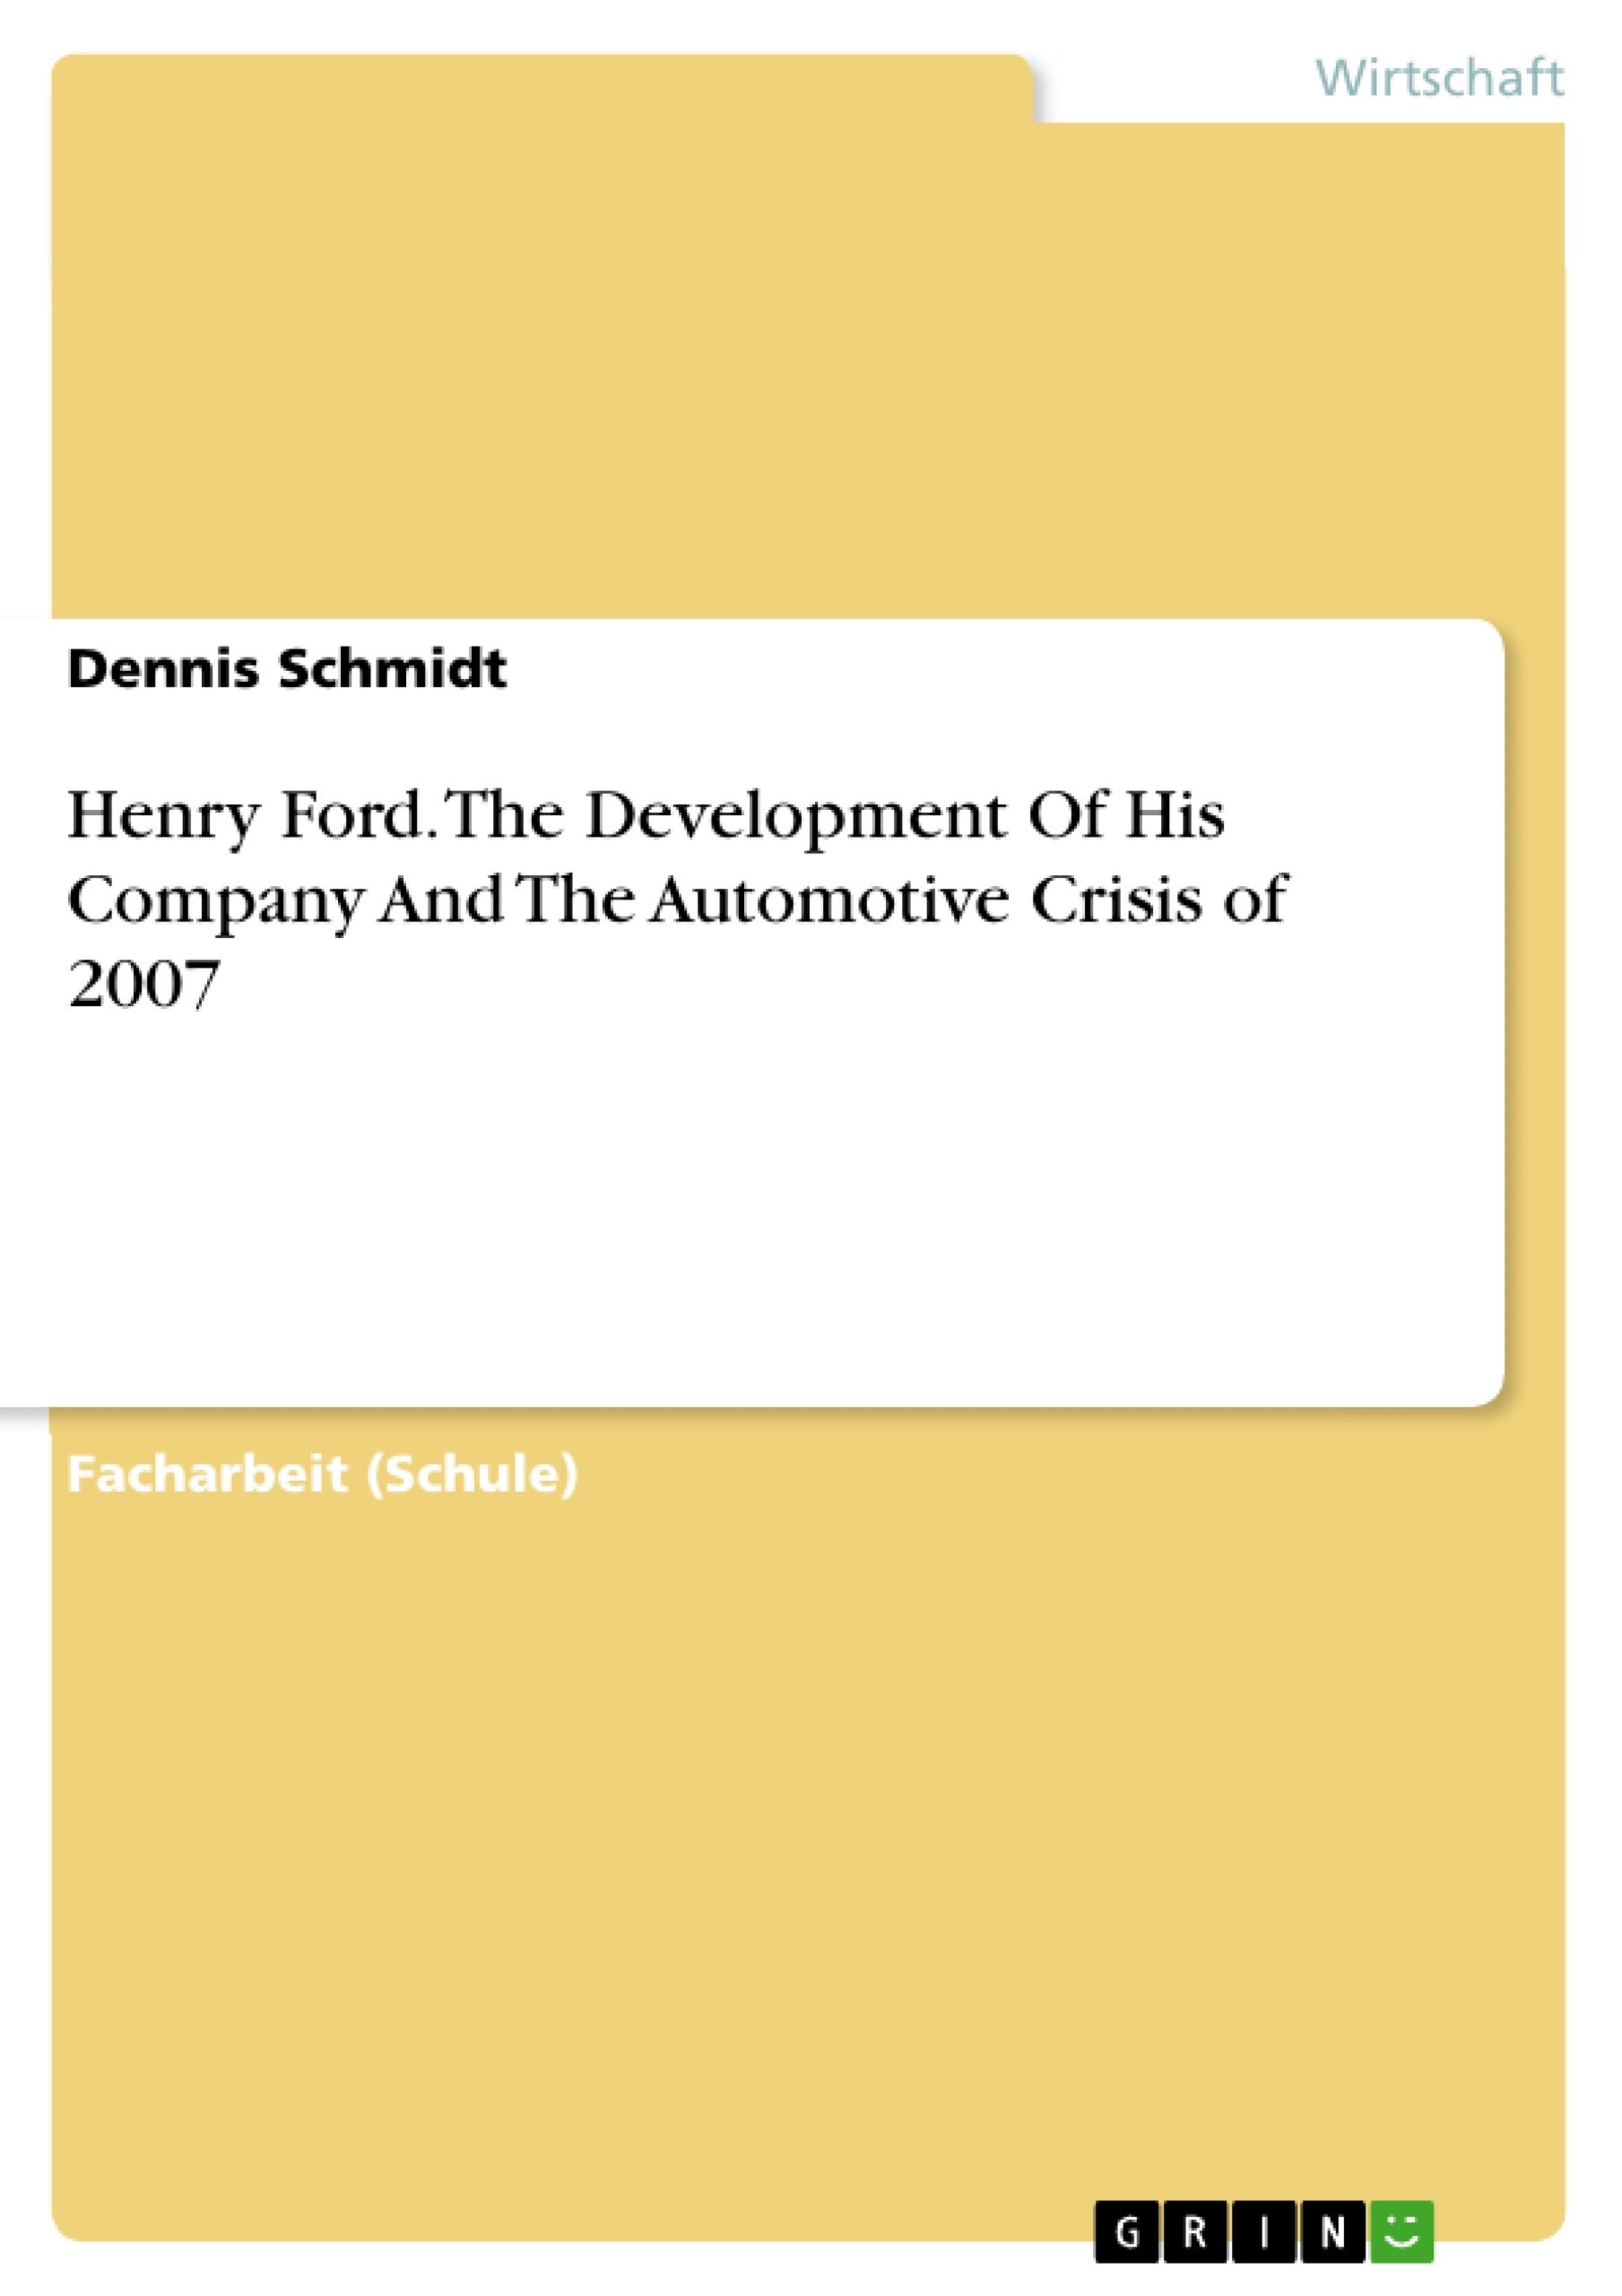 Title: Henry Ford. The Development Of His Company And The Automotive Crisis of 2007